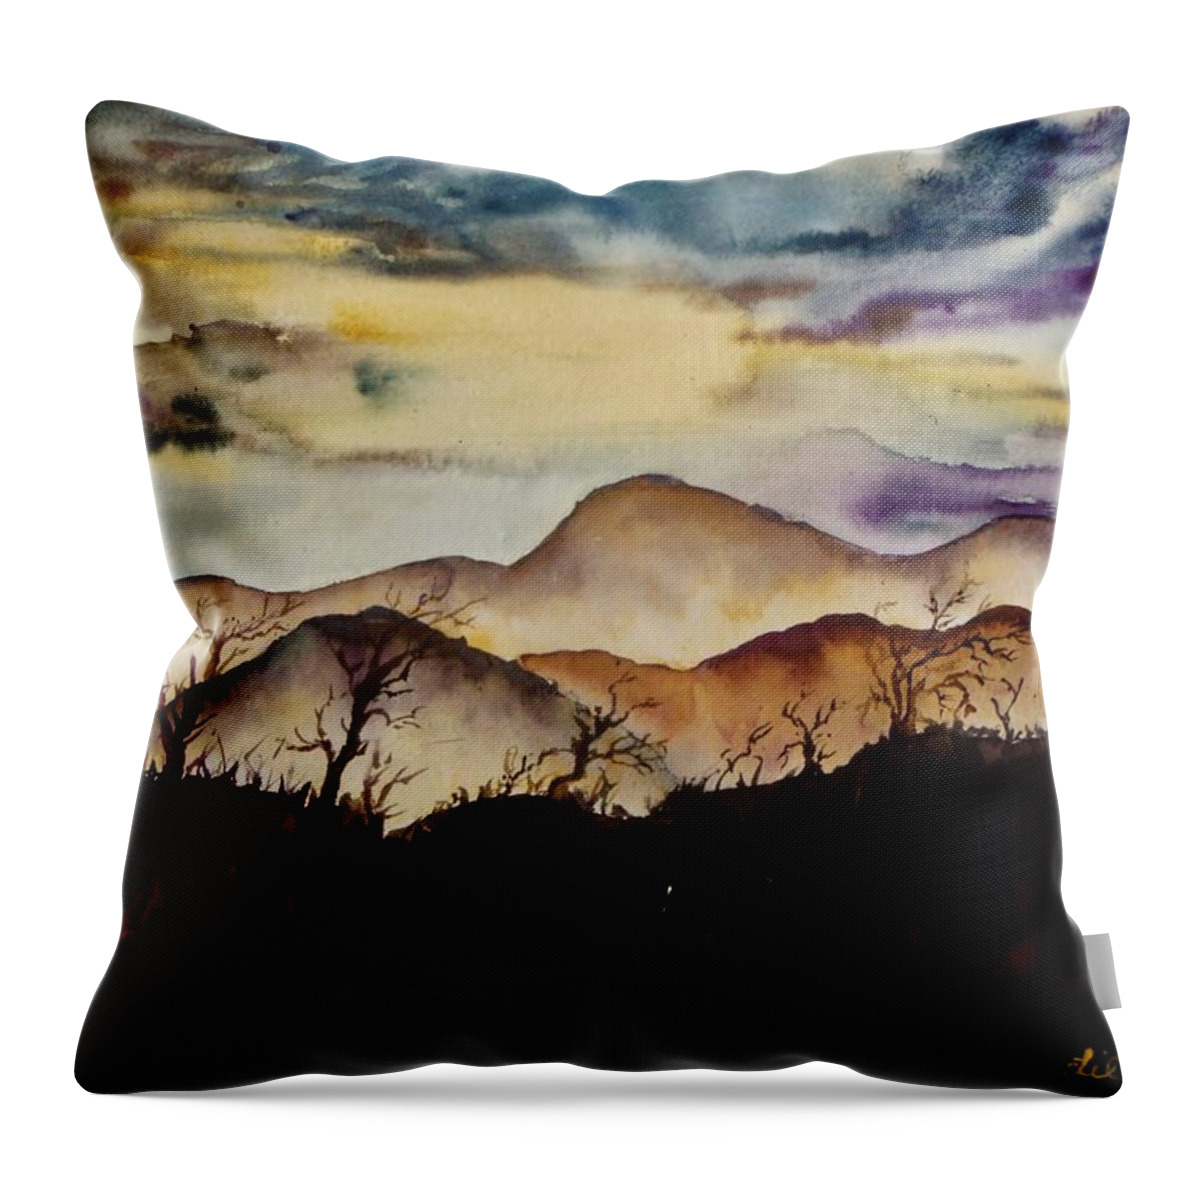 Fog Throw Pillow featuring the painting Misty Mountains by Lil Taylor